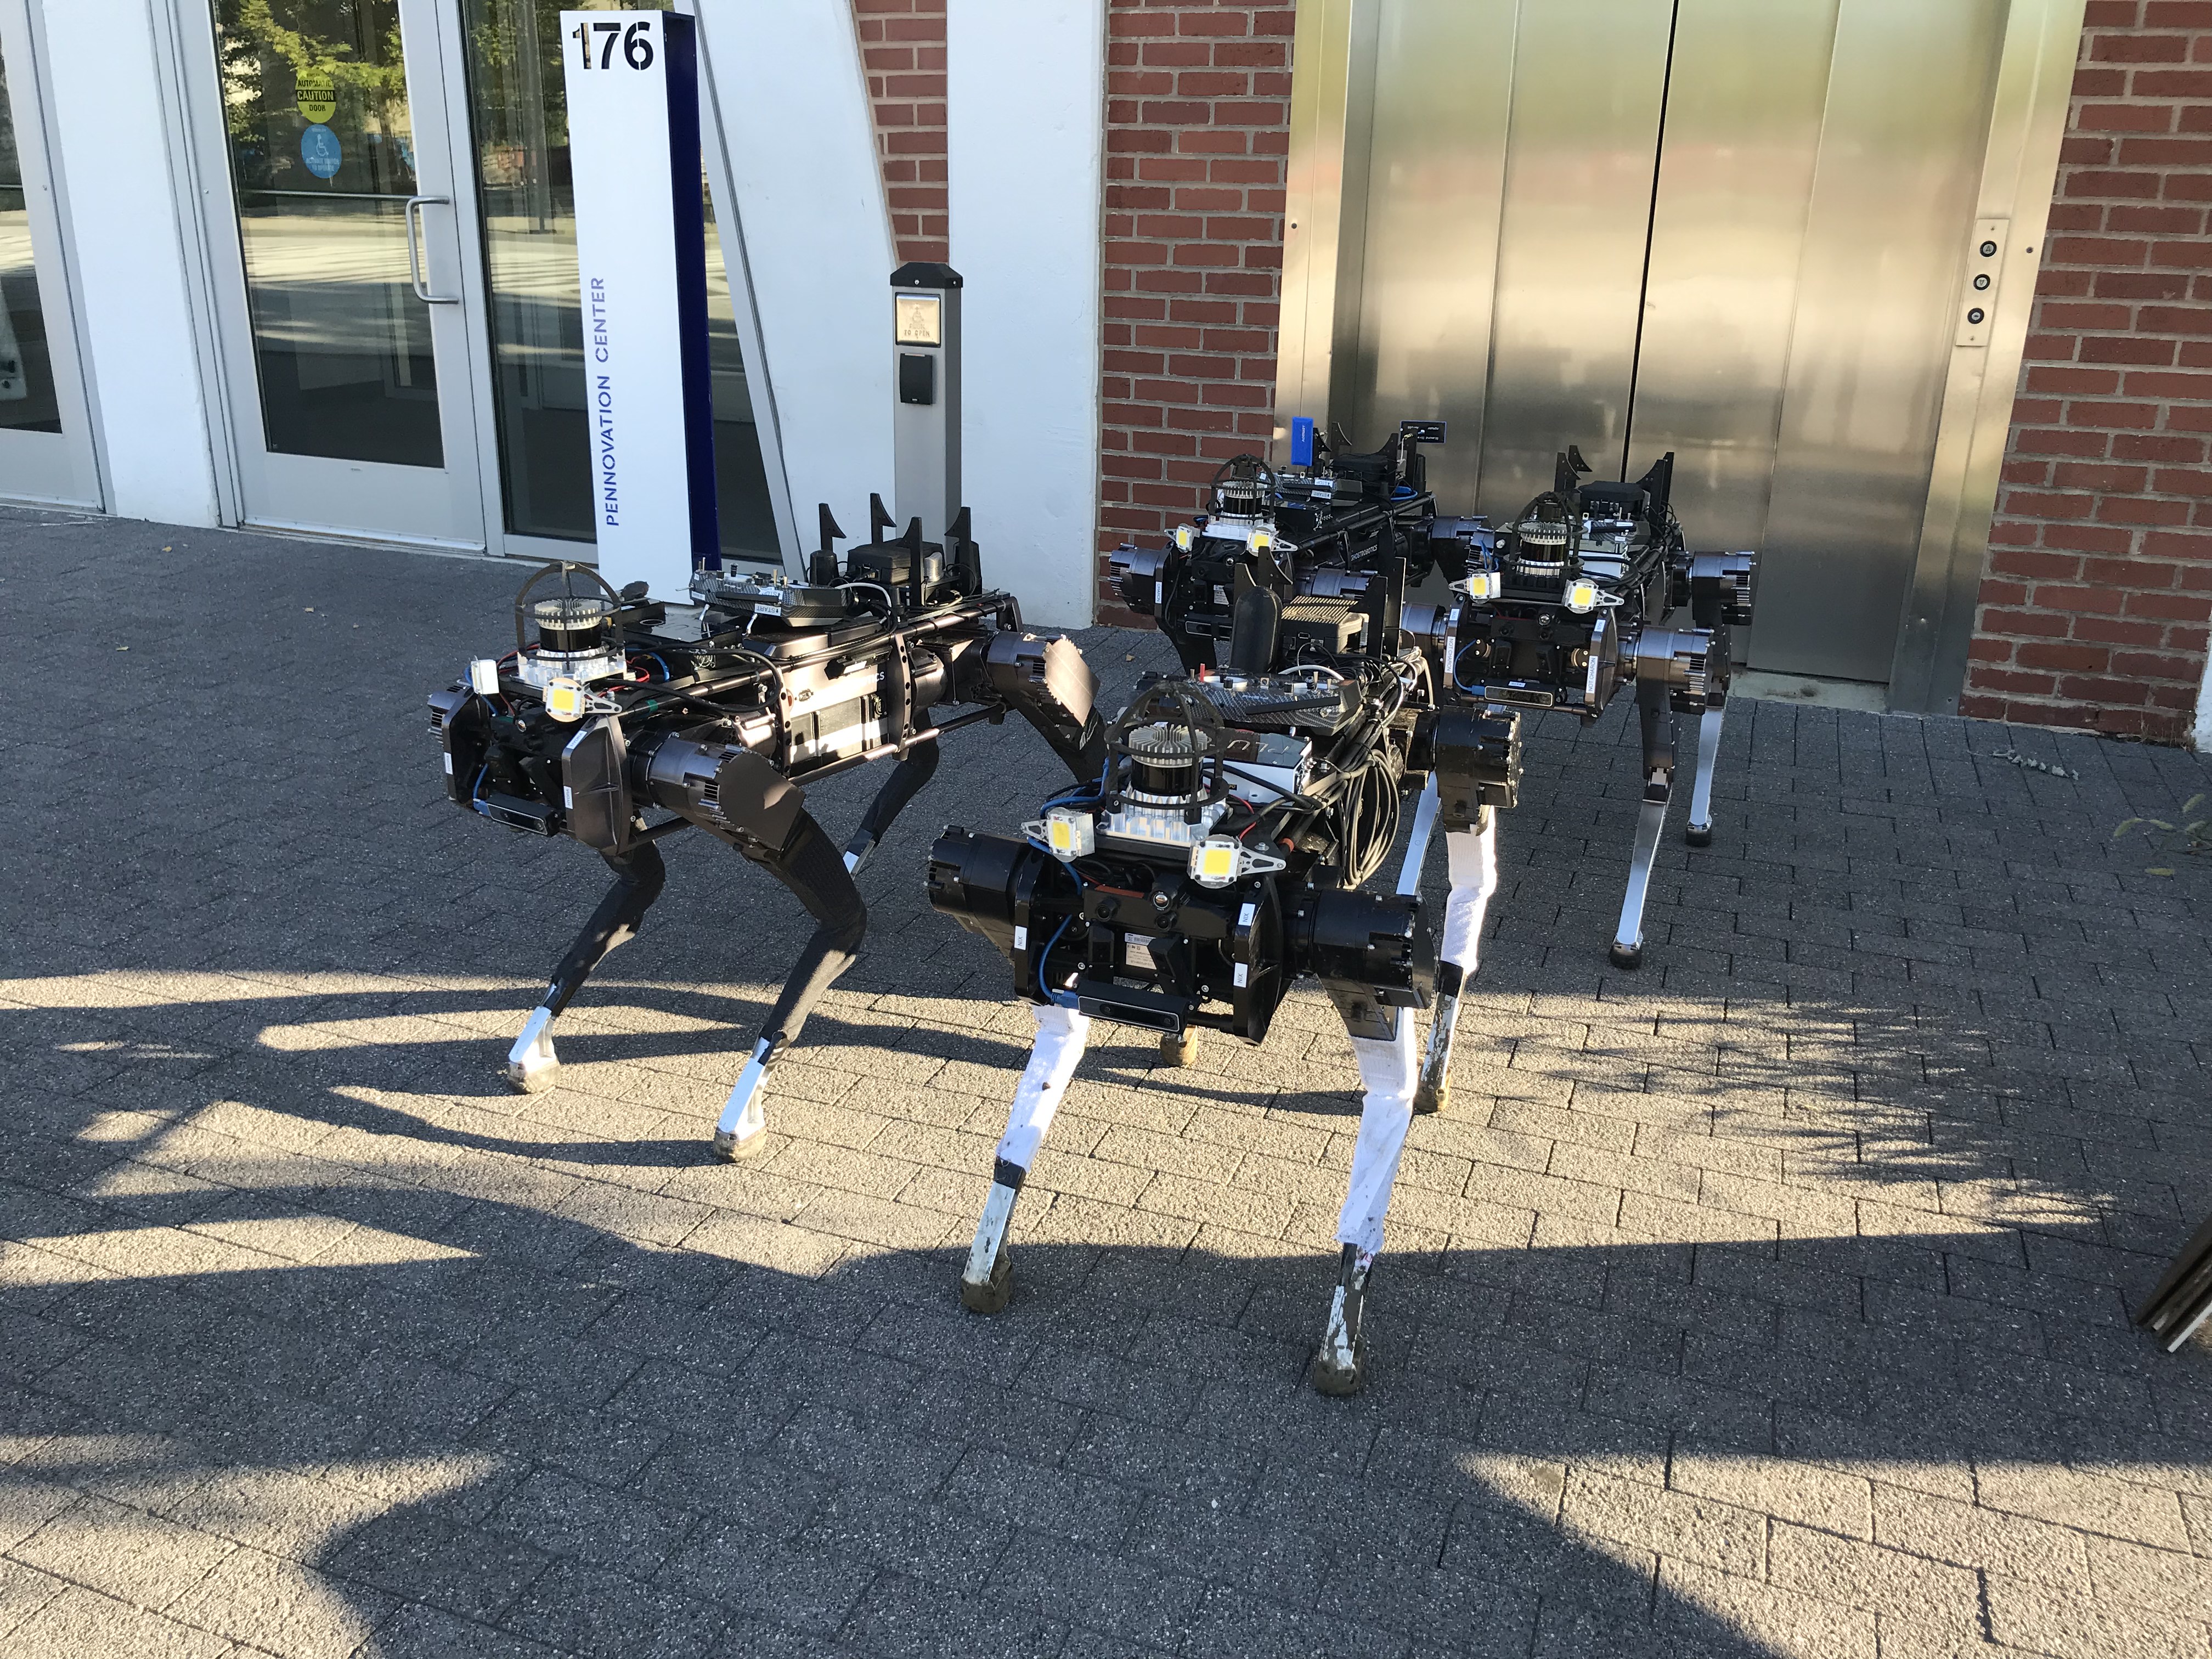 legged robots standing in front of an elevator outside